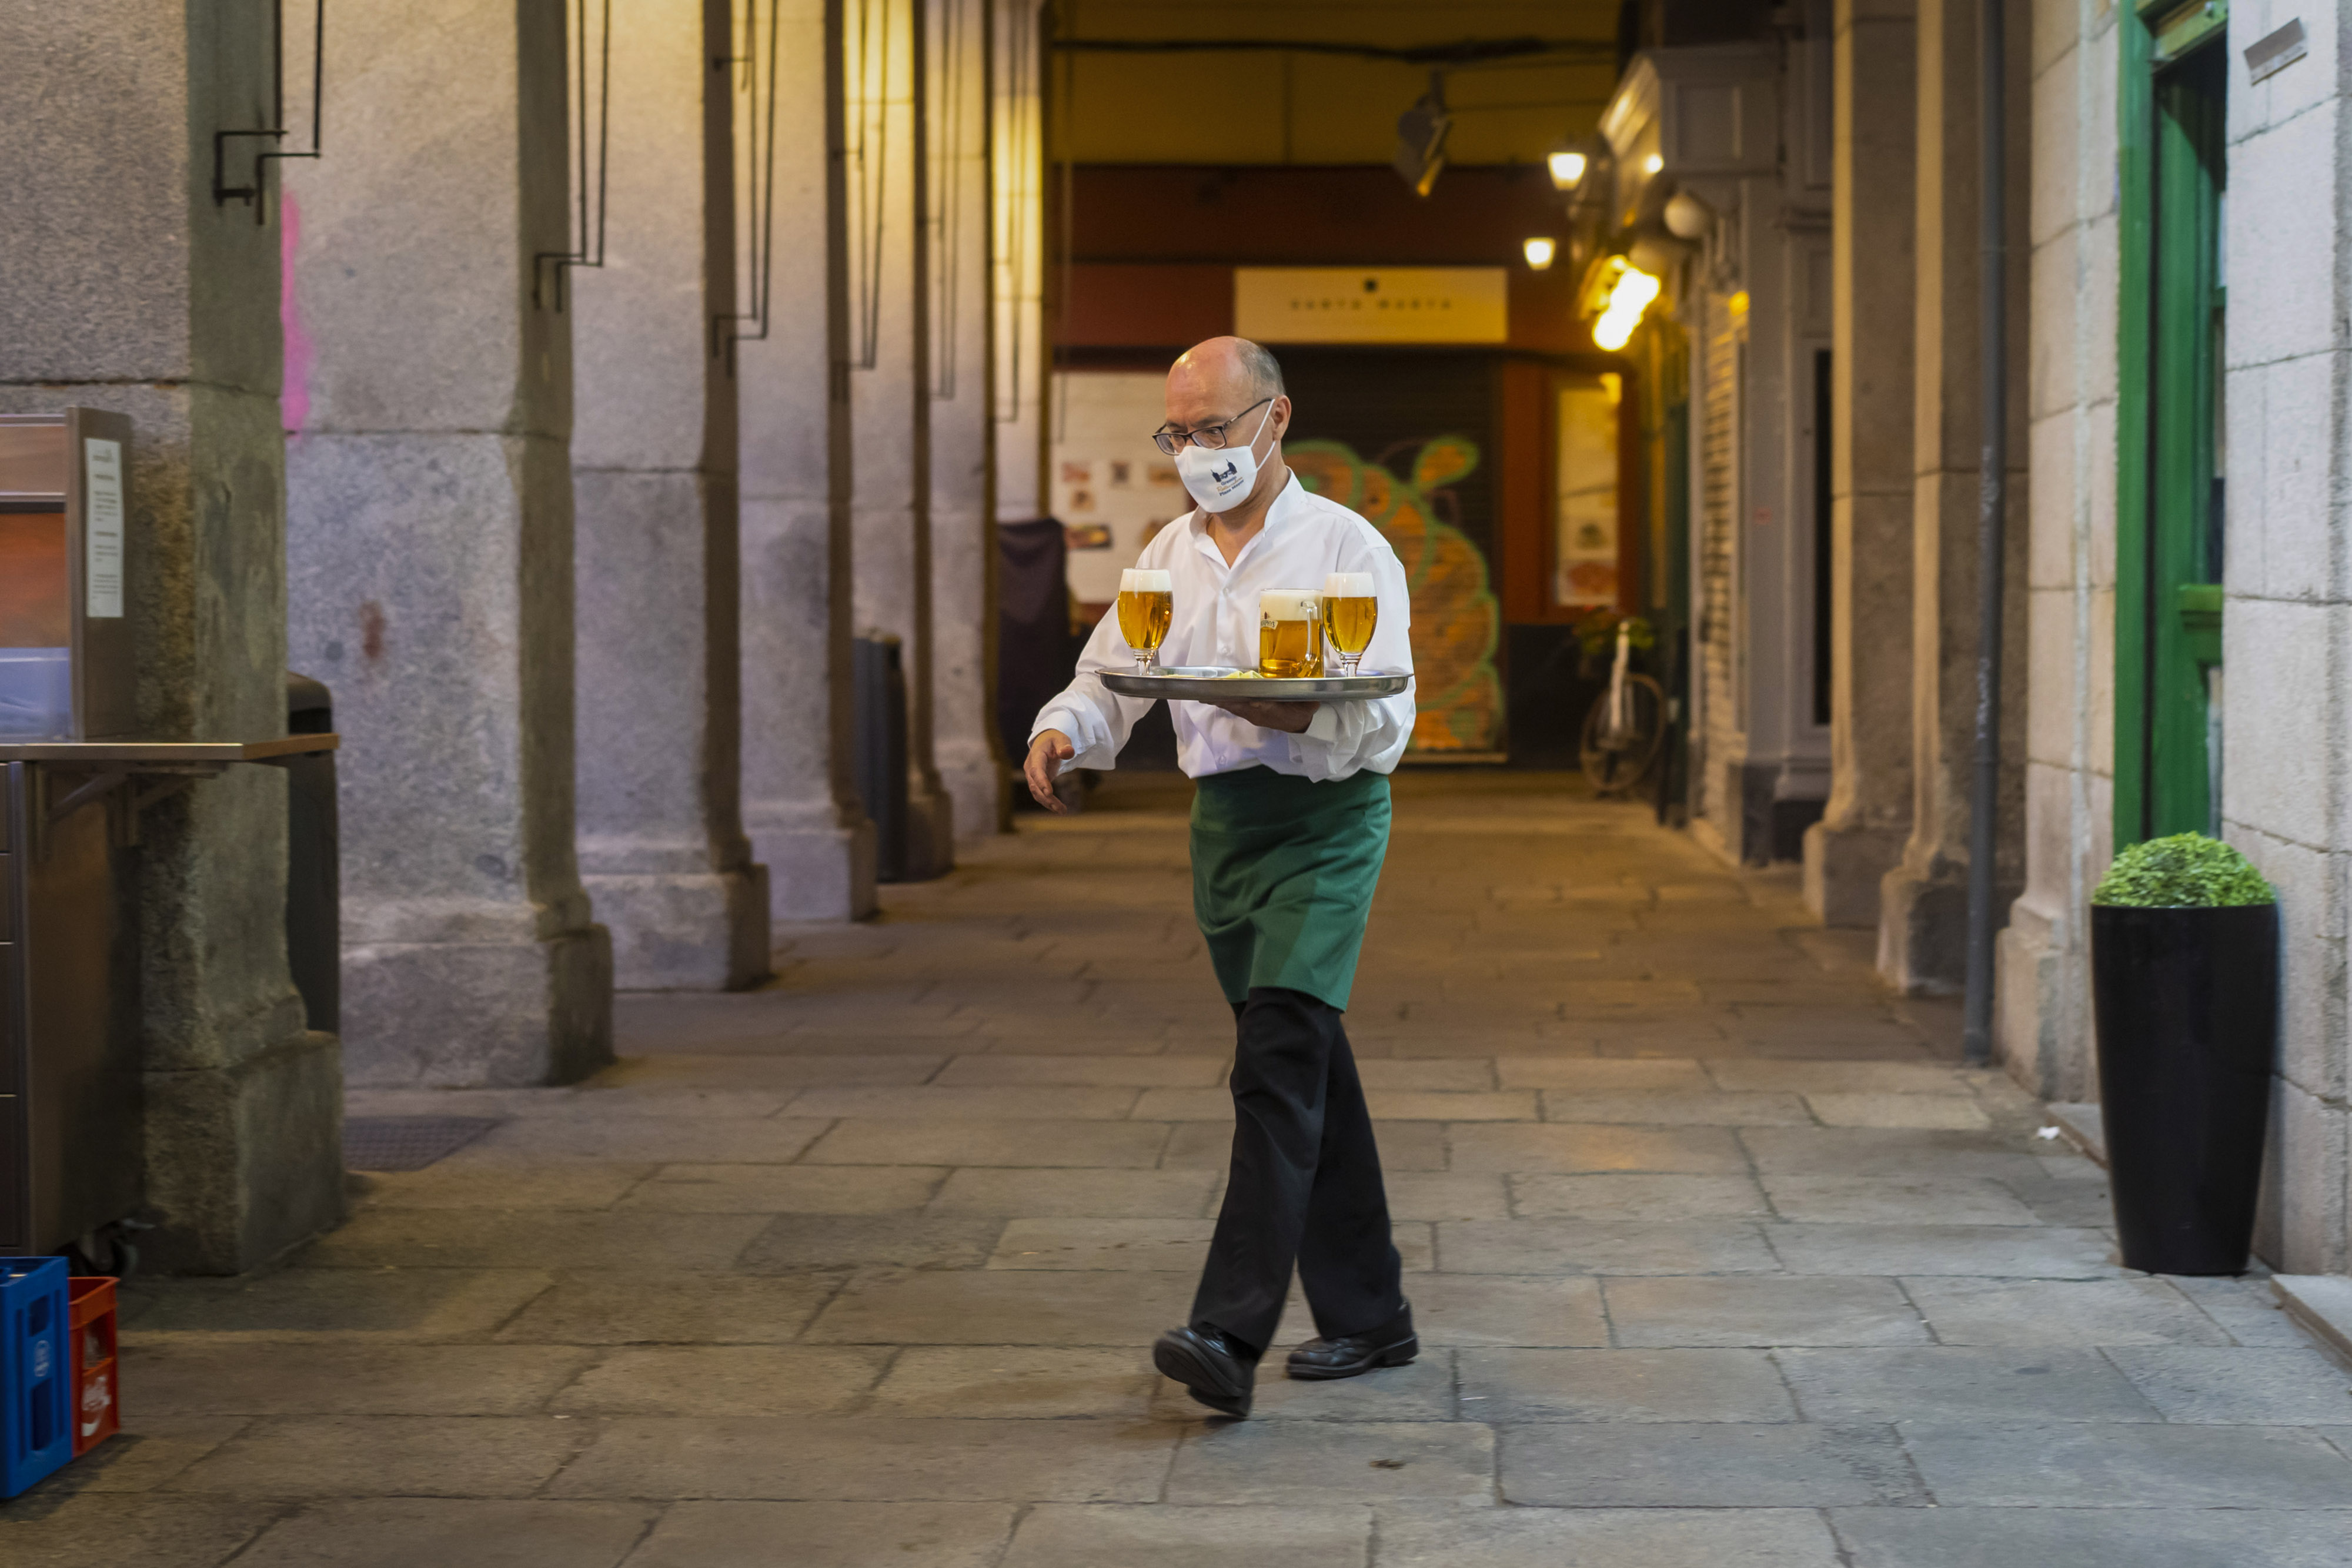 A waiter serves customers at an outside restaurant terrace in Plaza Mayor square, Madrid, Spain, on Wednesday, July 28, 2021. Spain is on track to be one of the fastest-growing economies among developed countries as the post-pandemic recovery accelerates, according to Prime Minister Pedro Sanchez.